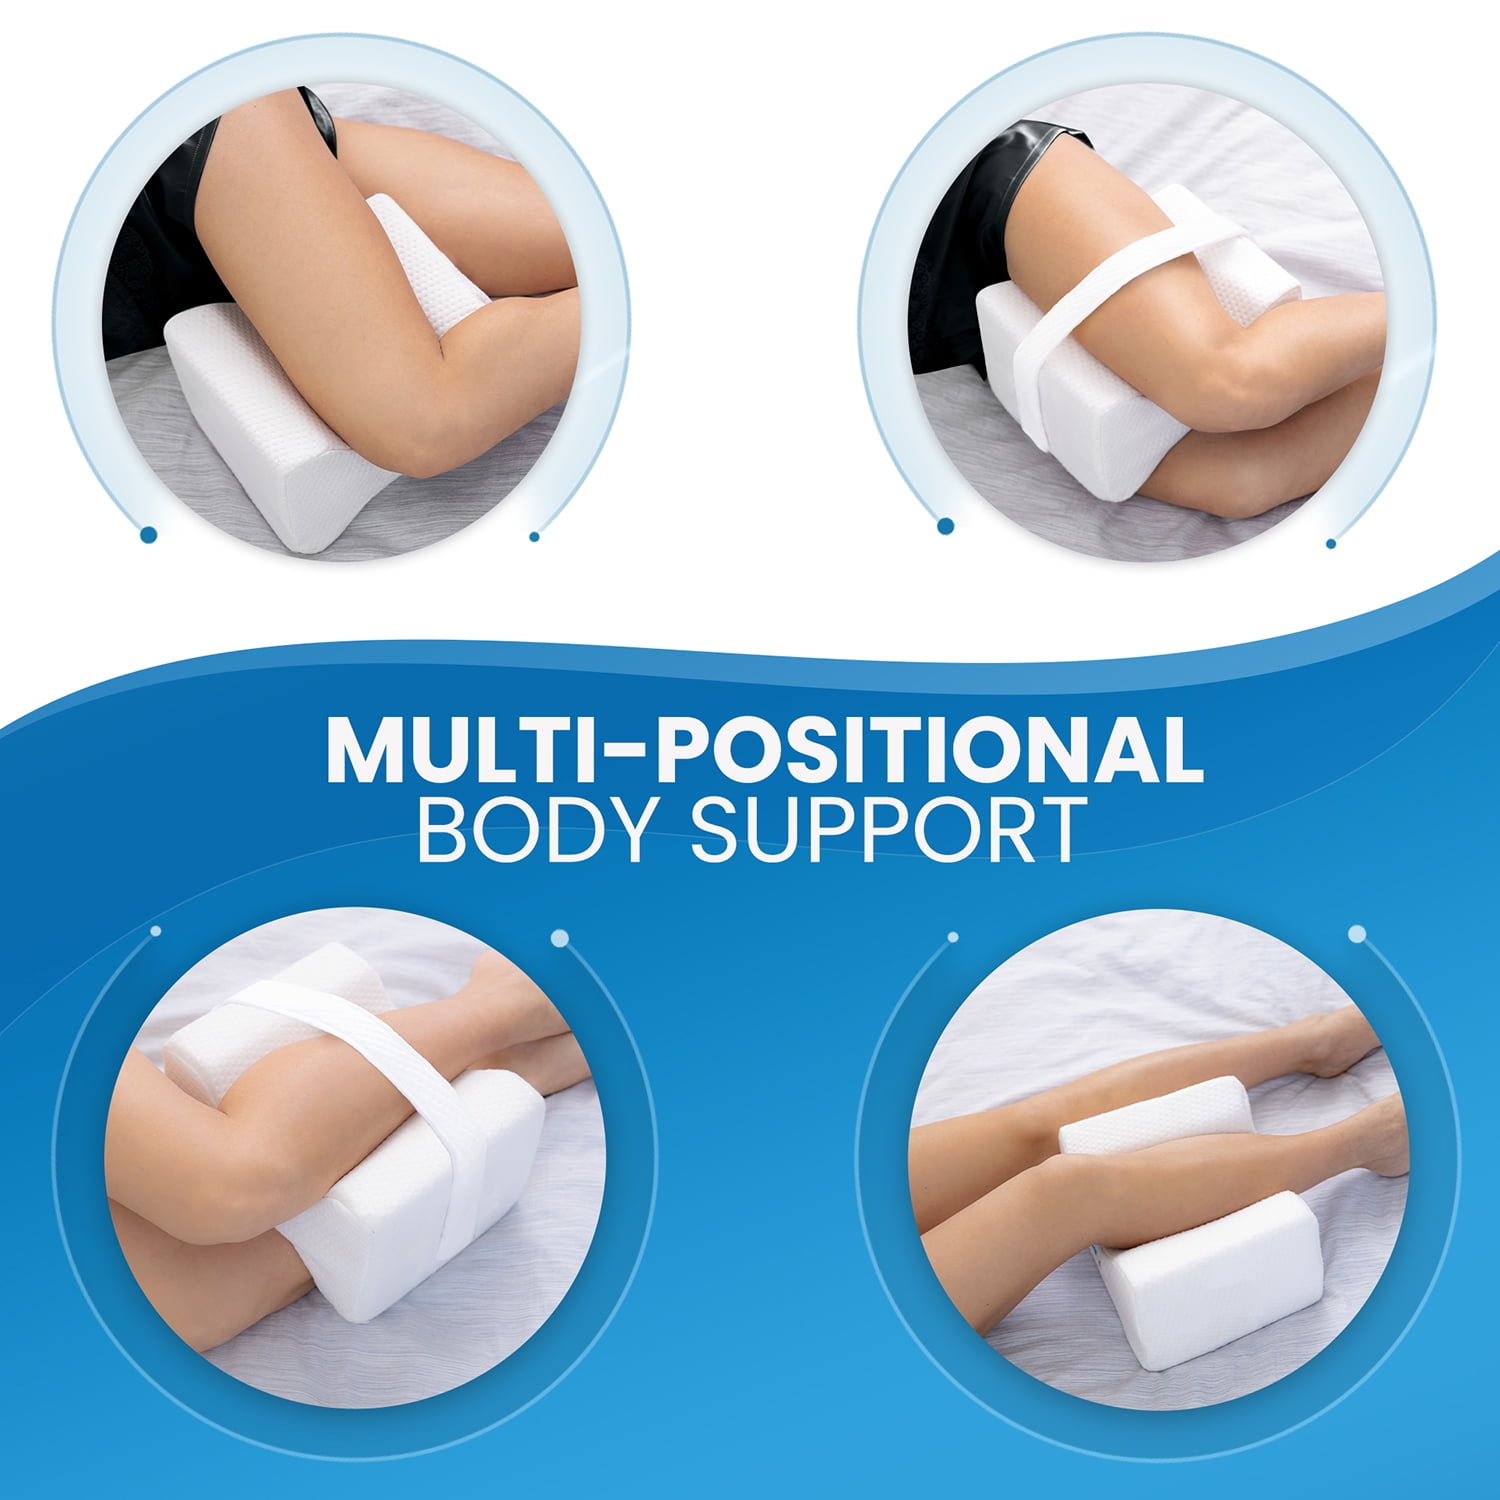 Comforever Leg Pillow for Sleeping Hip Pain,Memory Foam Knee Pillow for Side,Back Sleepers, Knee Support Cushion Pillow for Lower Back/Sciatica Pain